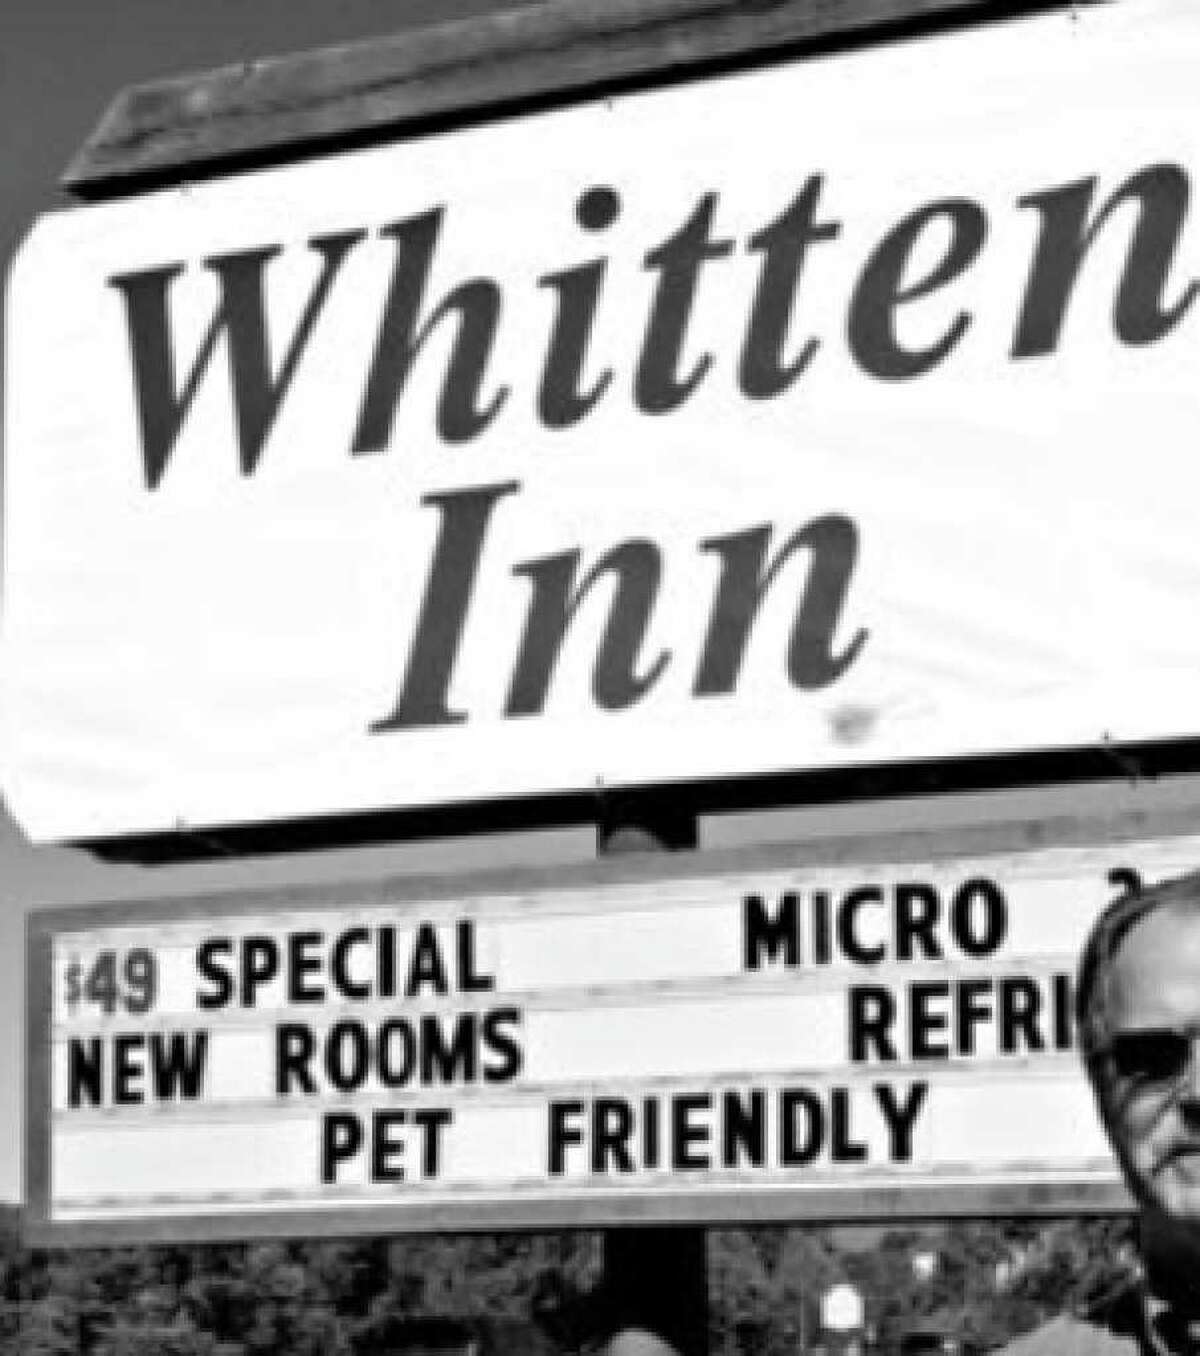 Larry Whitten, owner of Whitten Inn in Taos, N.M., fired some of his employees for speaking Spanish and not Anglicizing their first names. For instance, Maria would become Mary and Jose would become Joe.